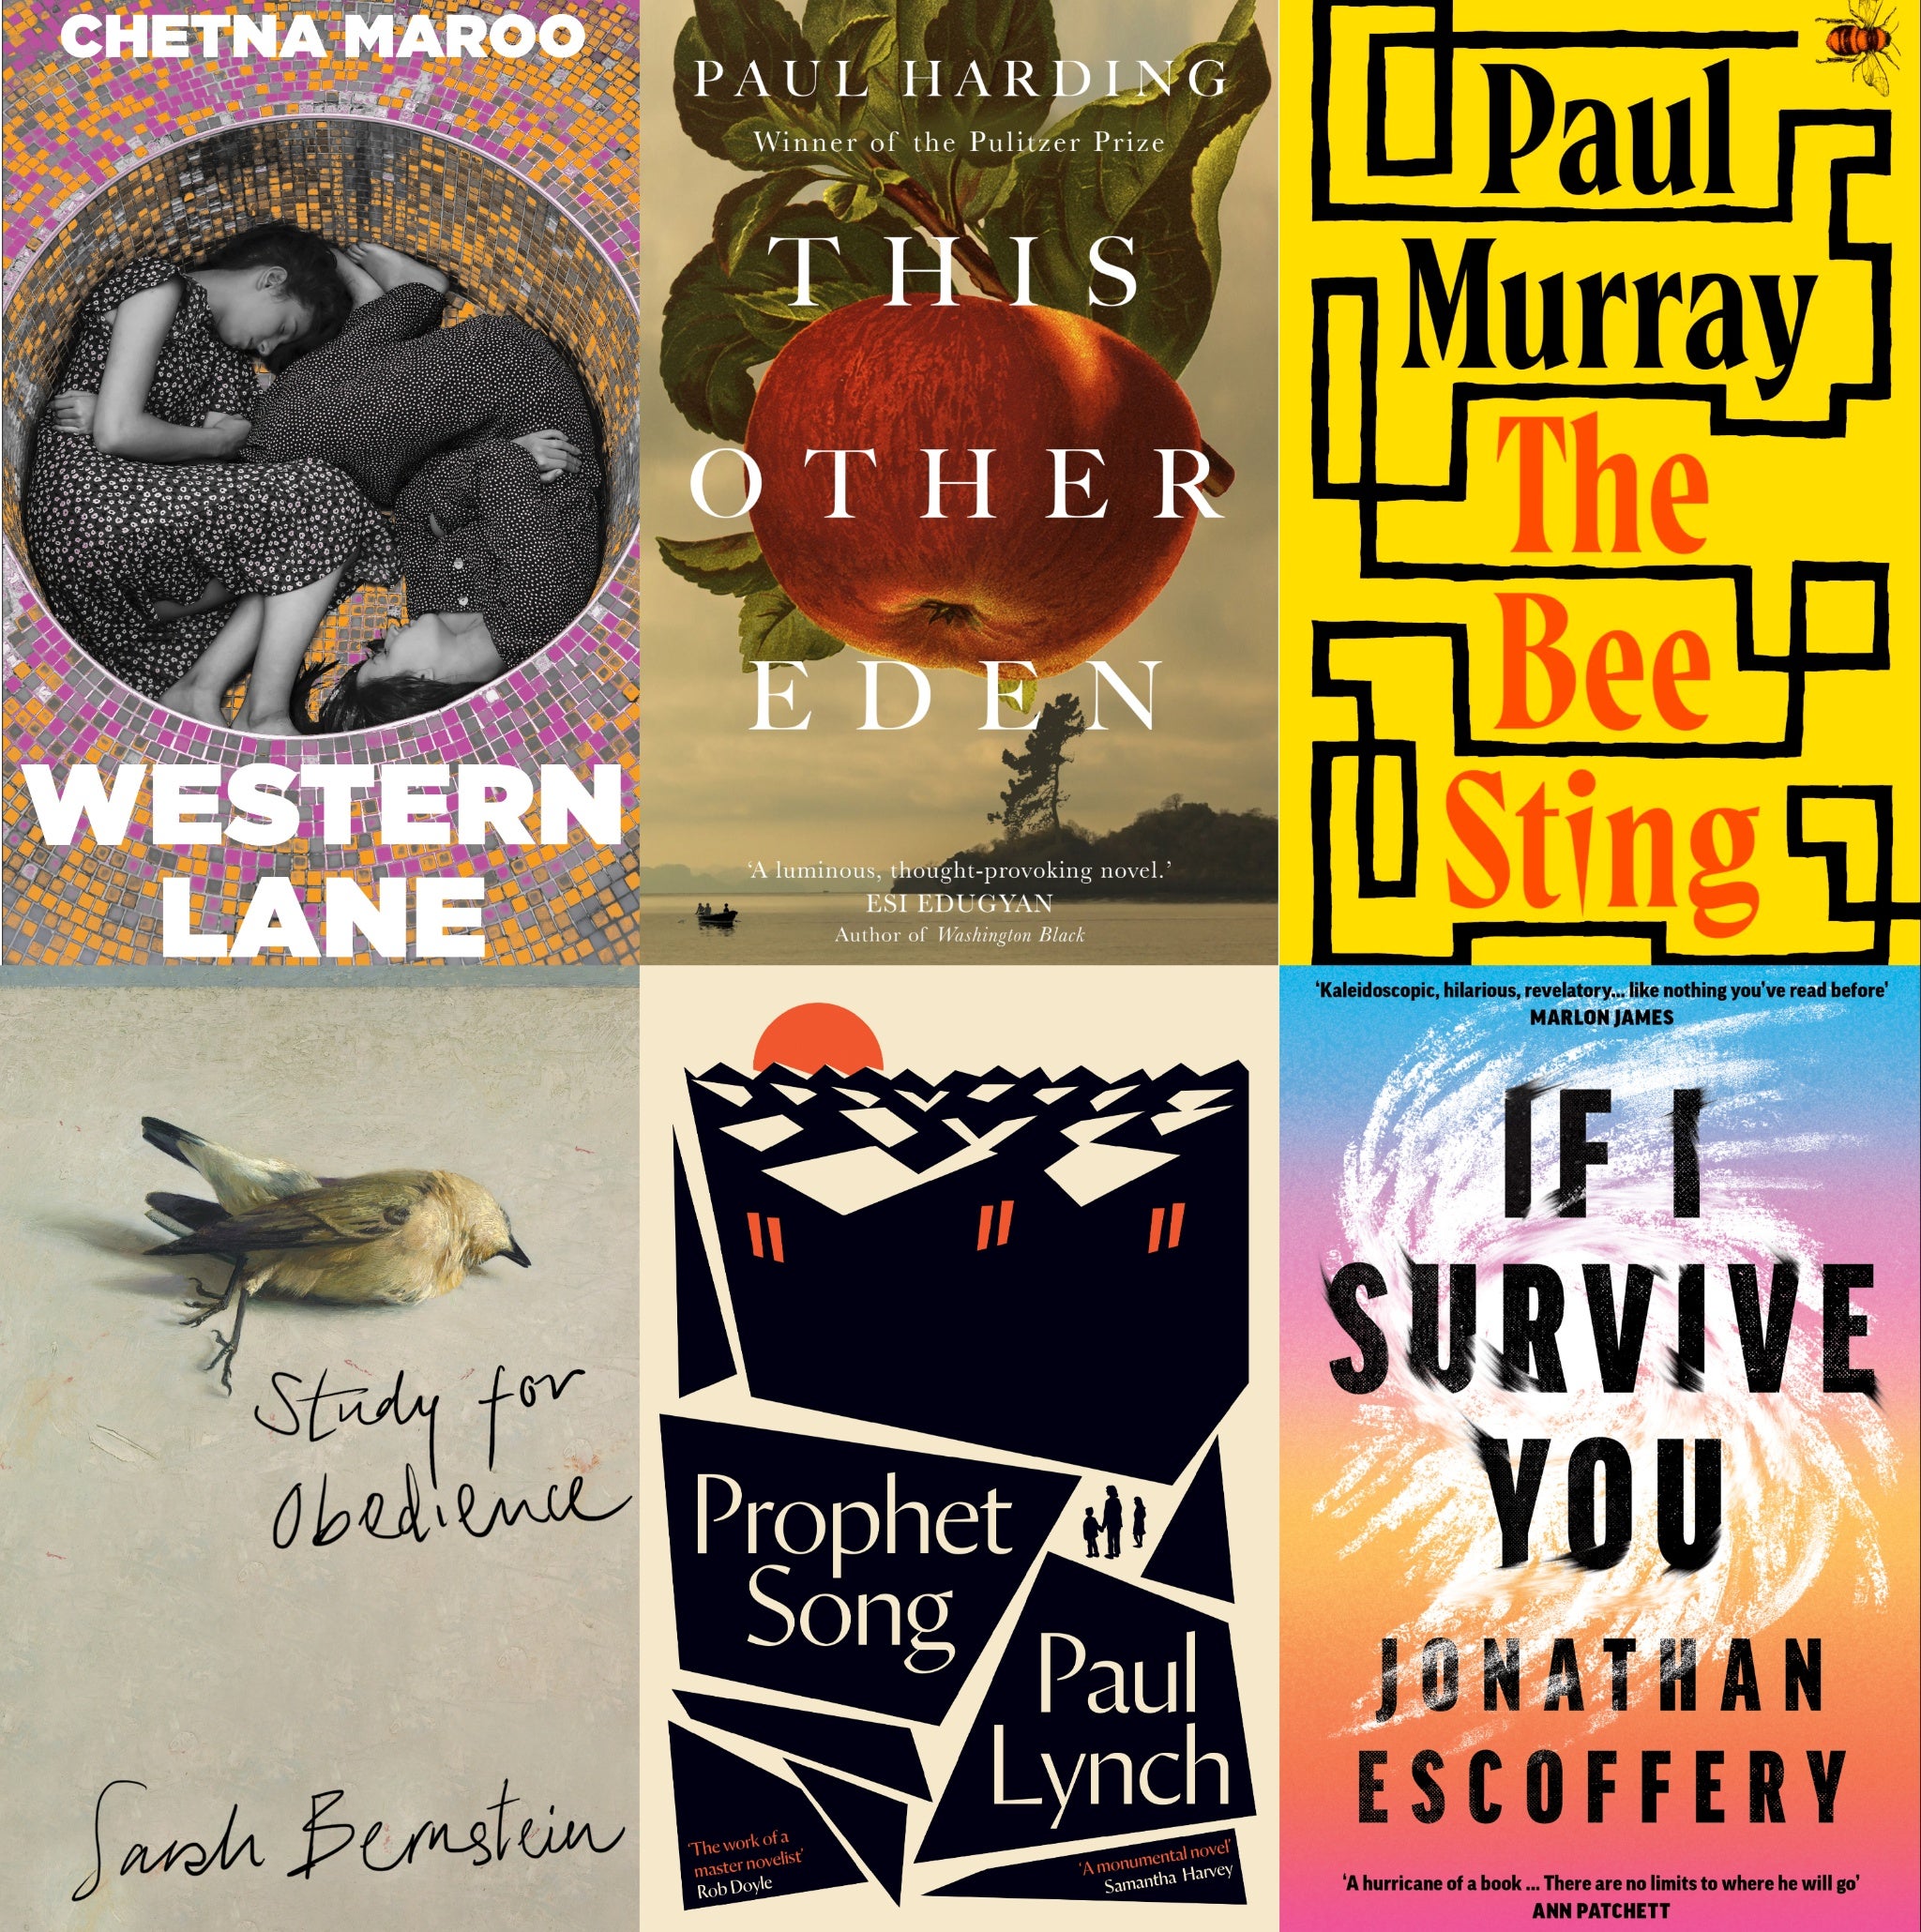 Book jackets for the six shortlisted works on this year’s Booker Prize